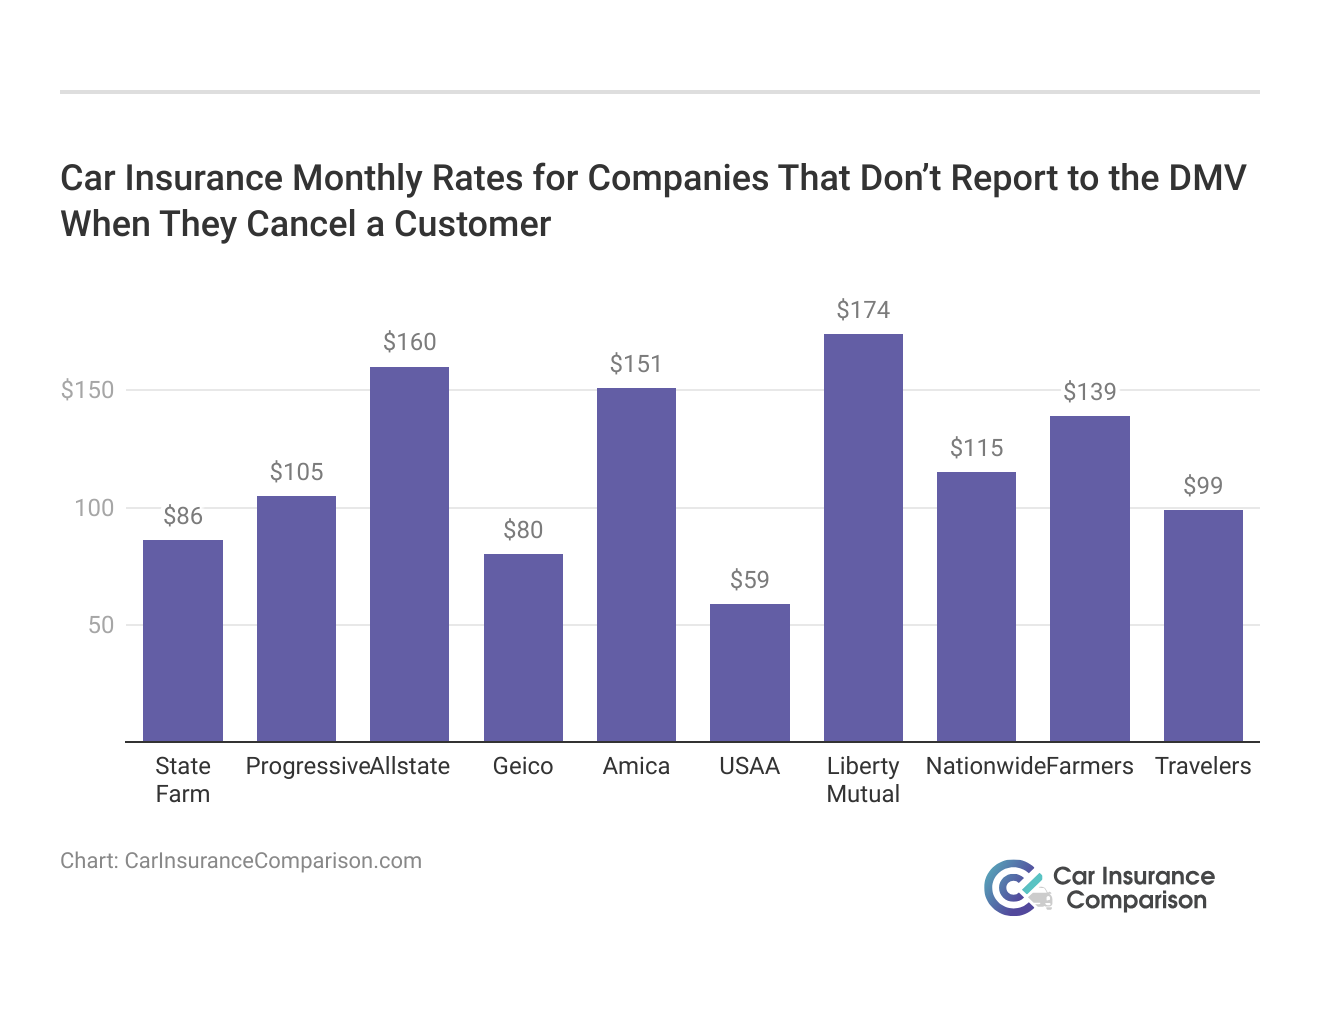 <h3>Car Insurance Monthly Rates for Companies That Don’t Report to the DMV When They Cancel a Customer</h3>